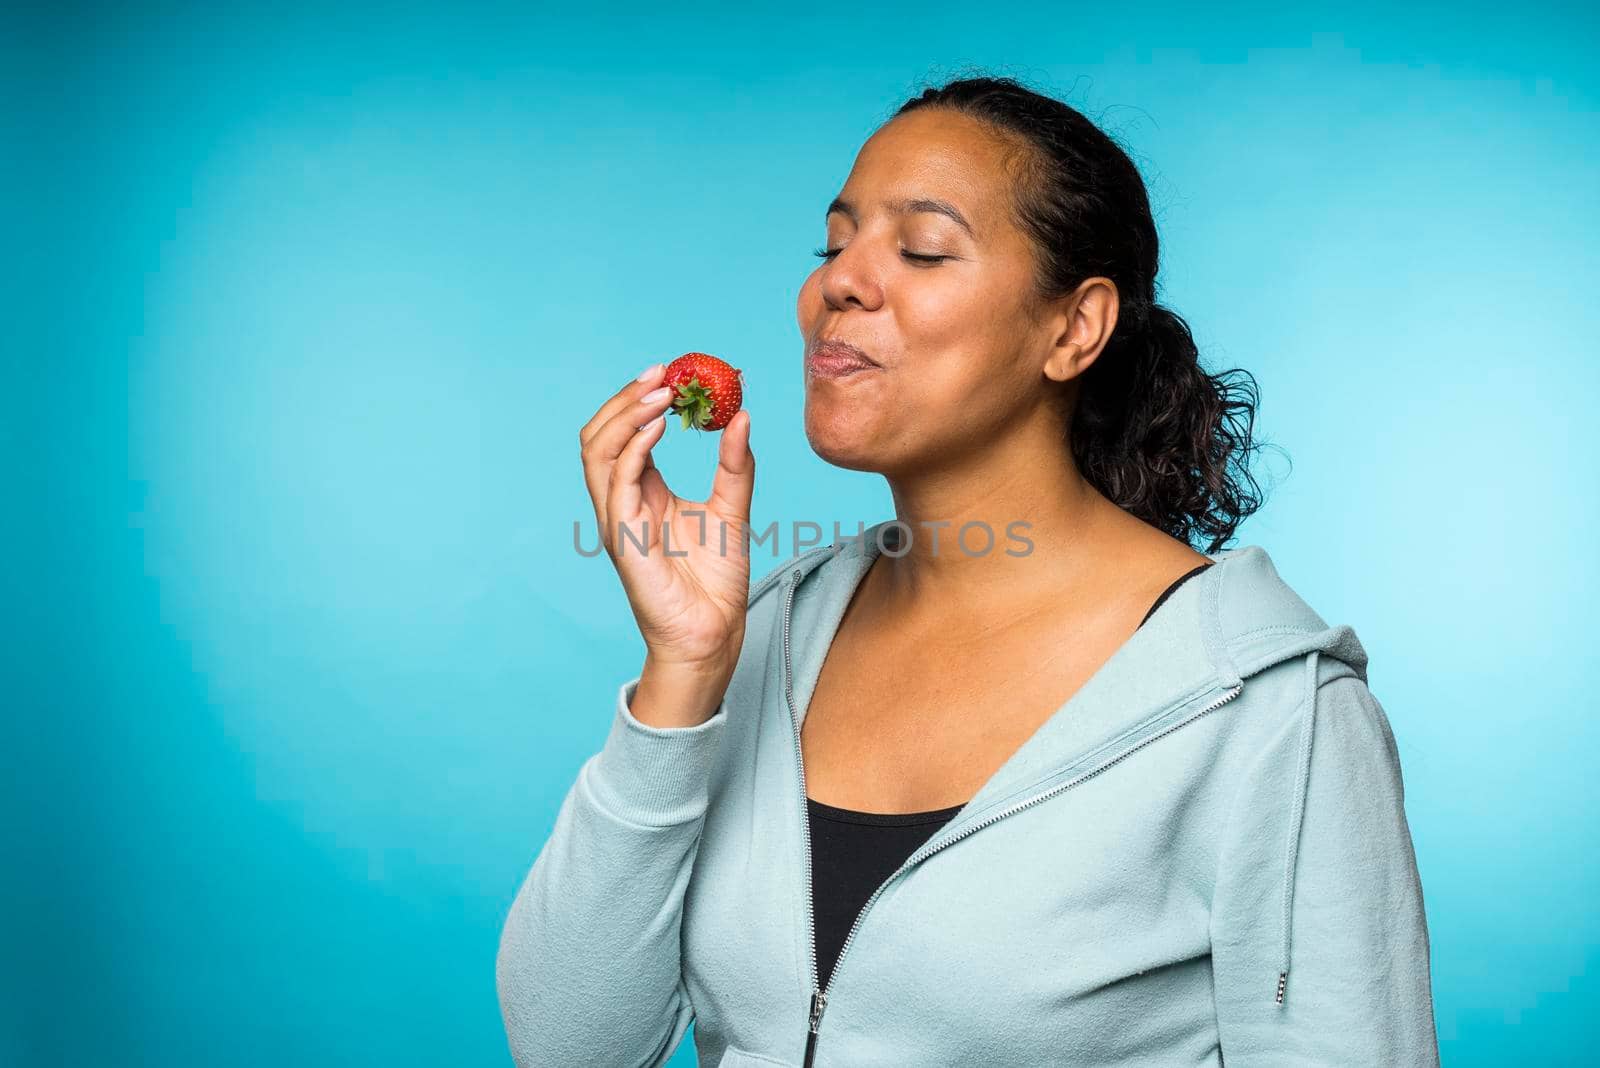 Beautiful young mixed race woman in casual clothing eating and enjoying a fresh strawberry with a blue background by LeoniekvanderVliet